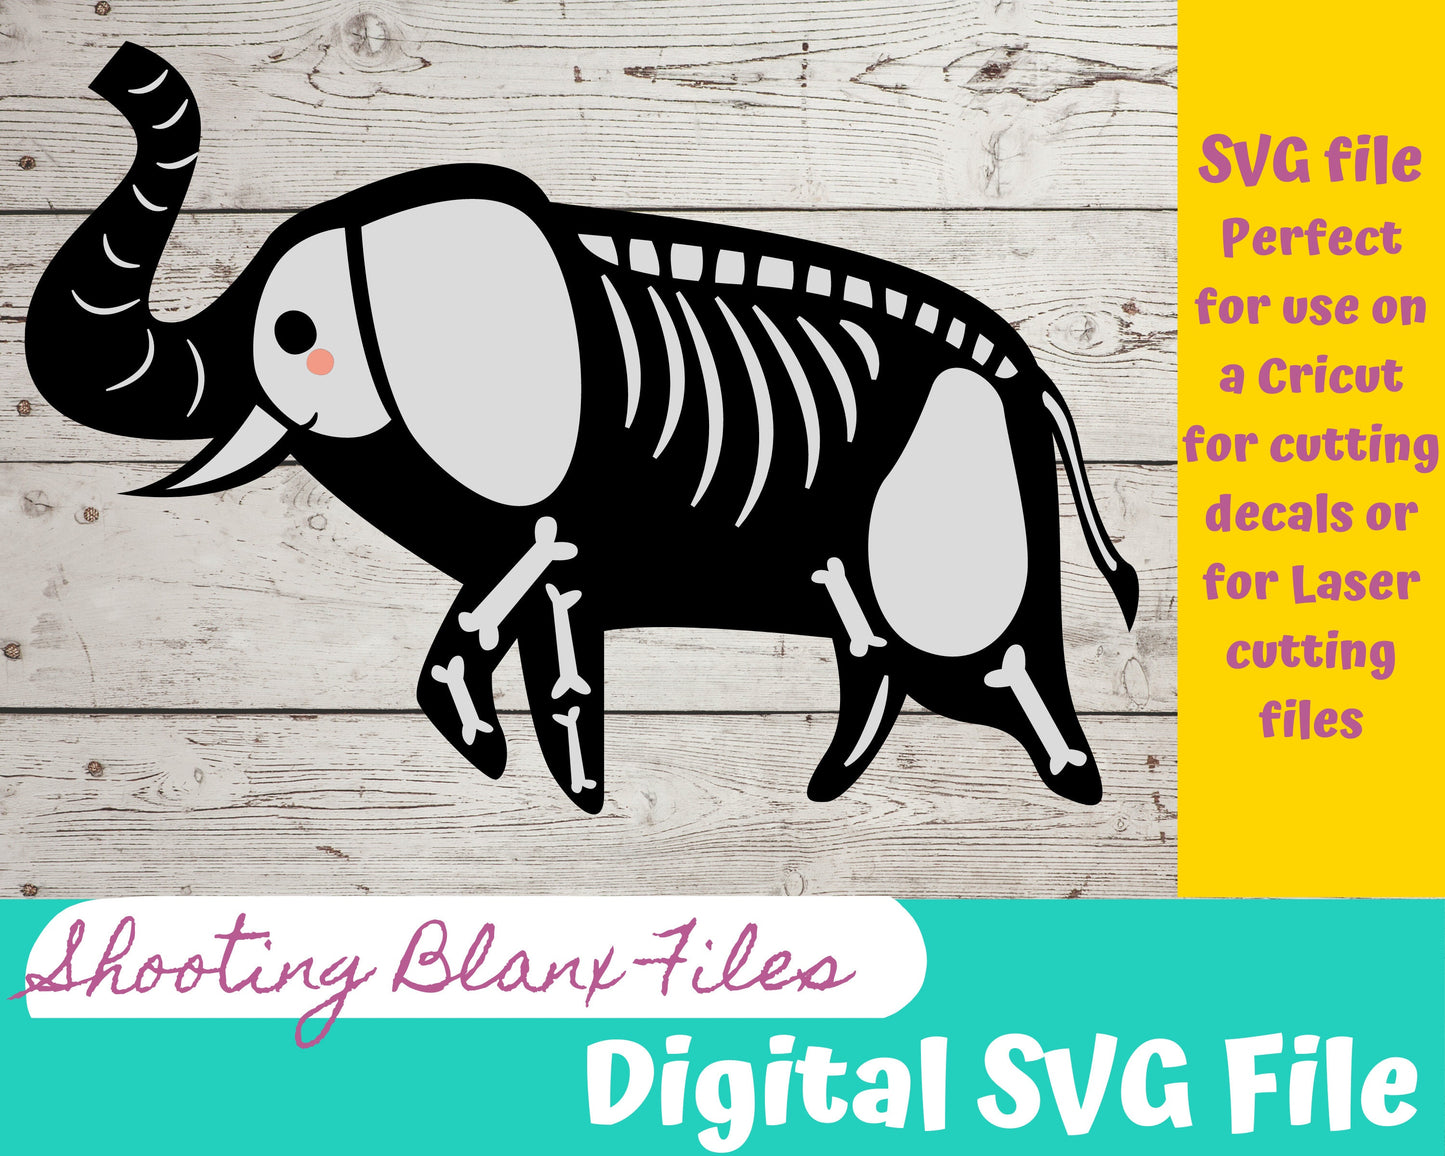 Elephant Skeleton SVG file perfect for Cricut, Cameo, or Silhouette also for laser engraving Glowforge, Scary, Halloween, animal